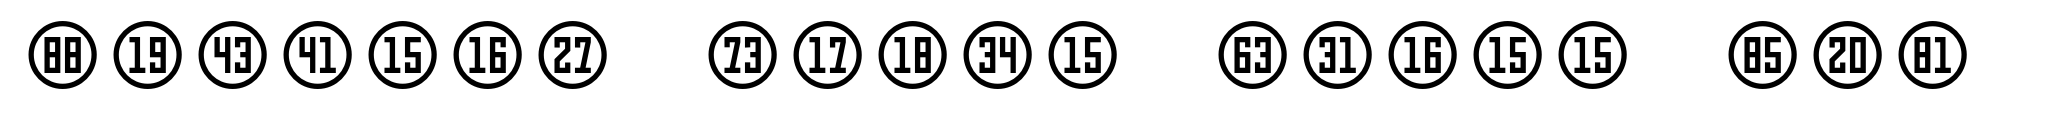 Numbers Style Three Circle Positive image